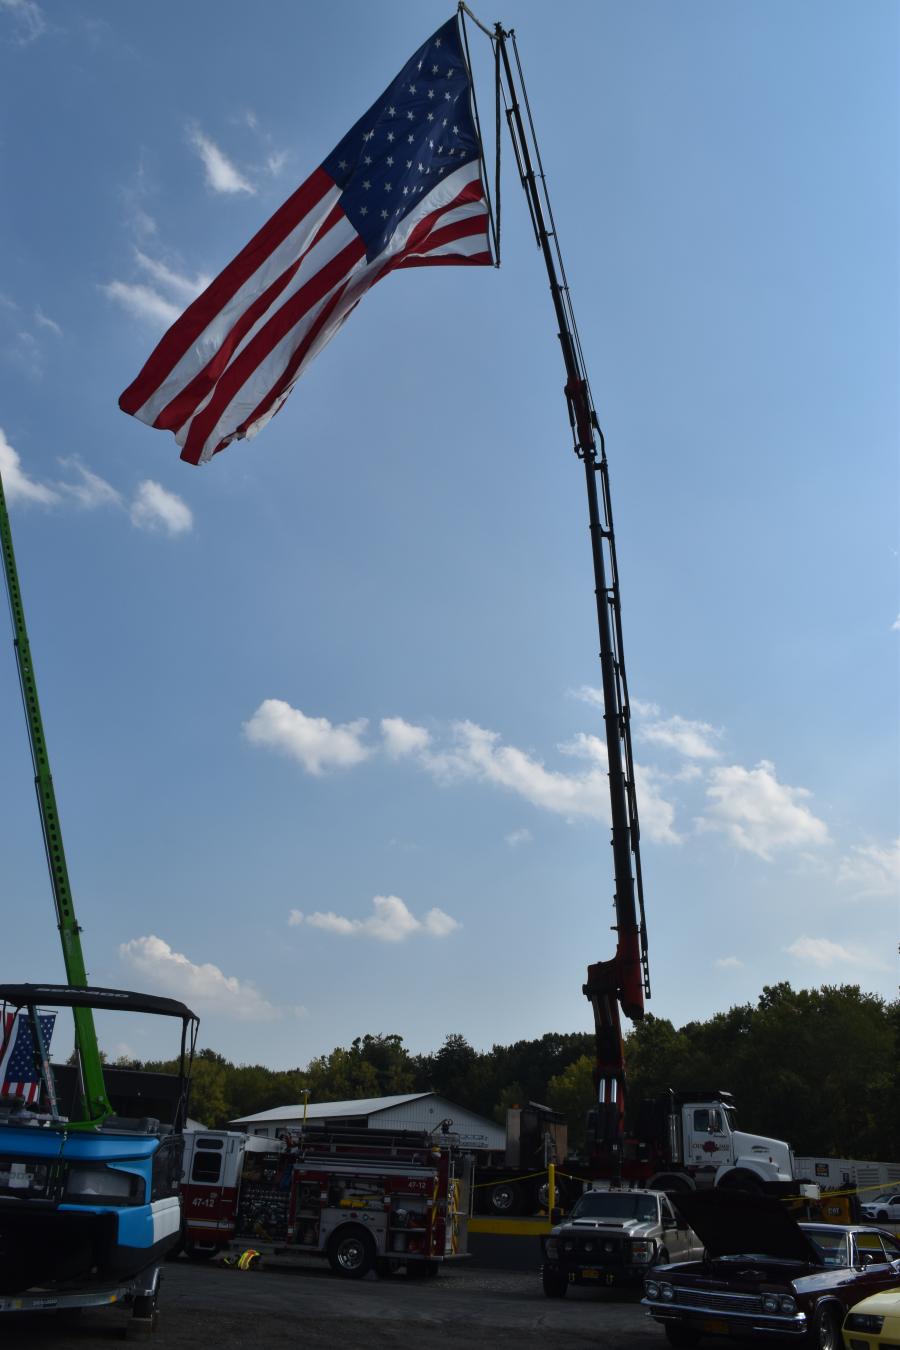 Old Glory waves high above the event.
(CEG photo) 